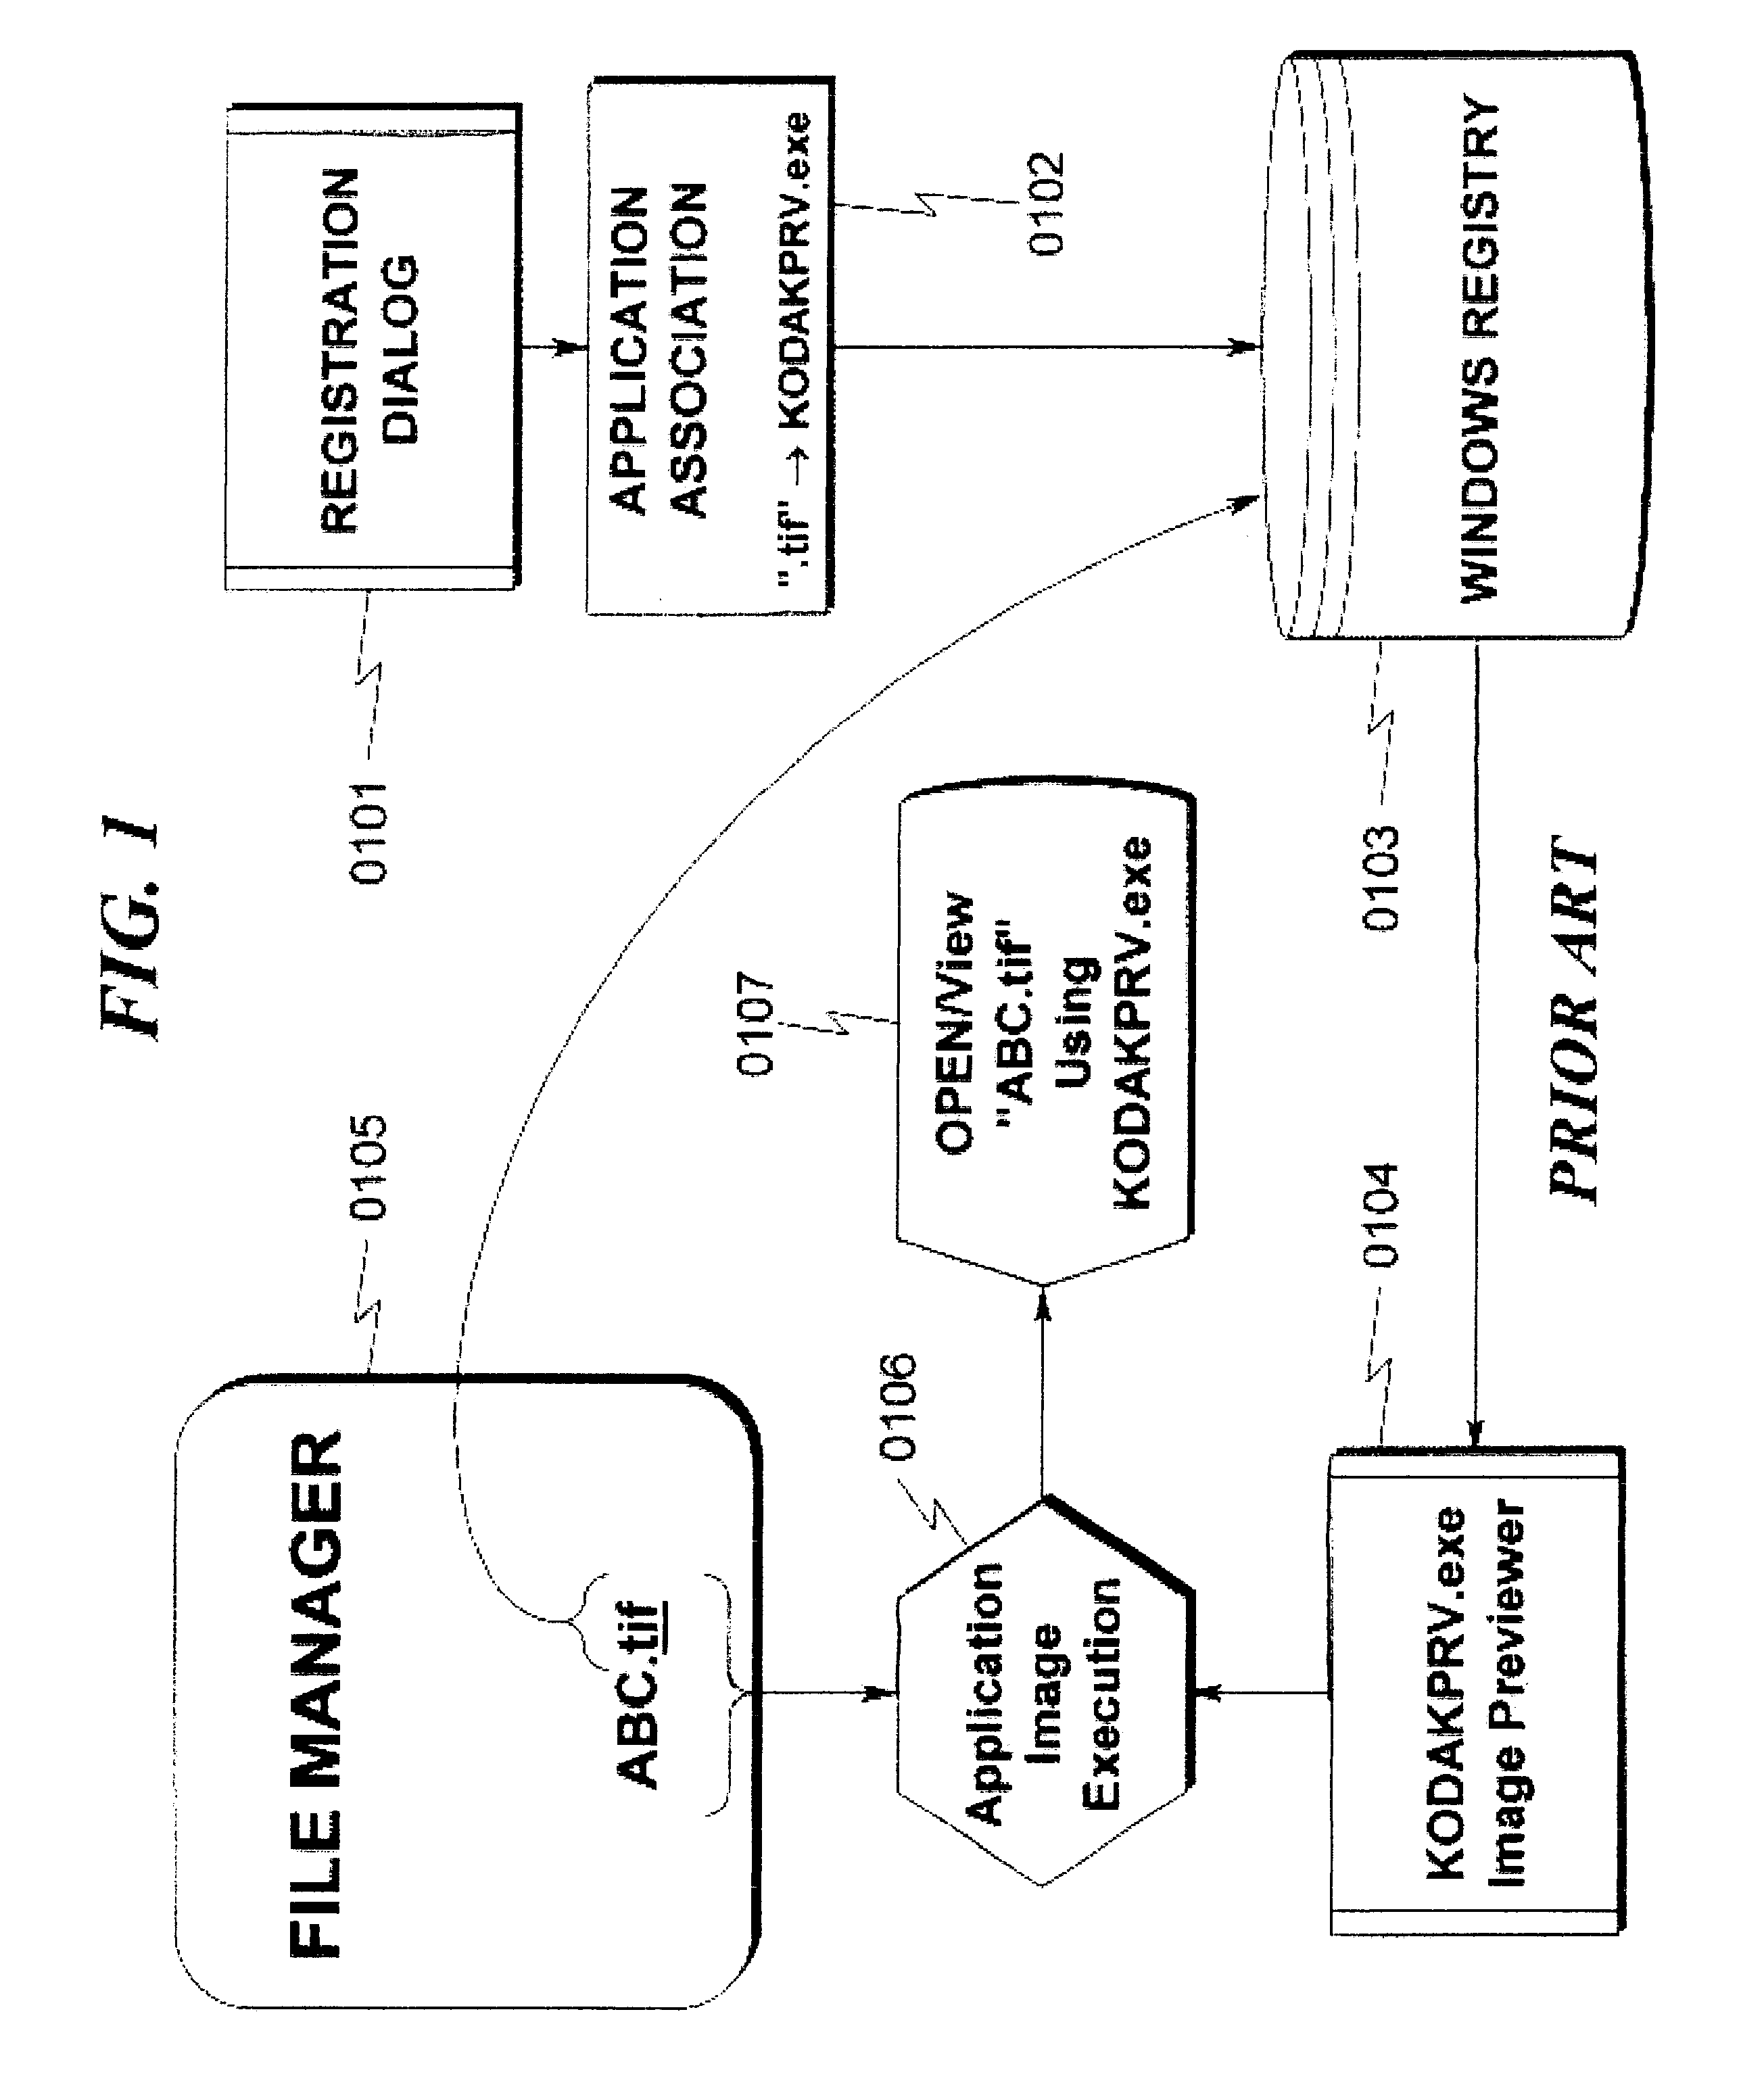 System and method for registering and providing a tool service